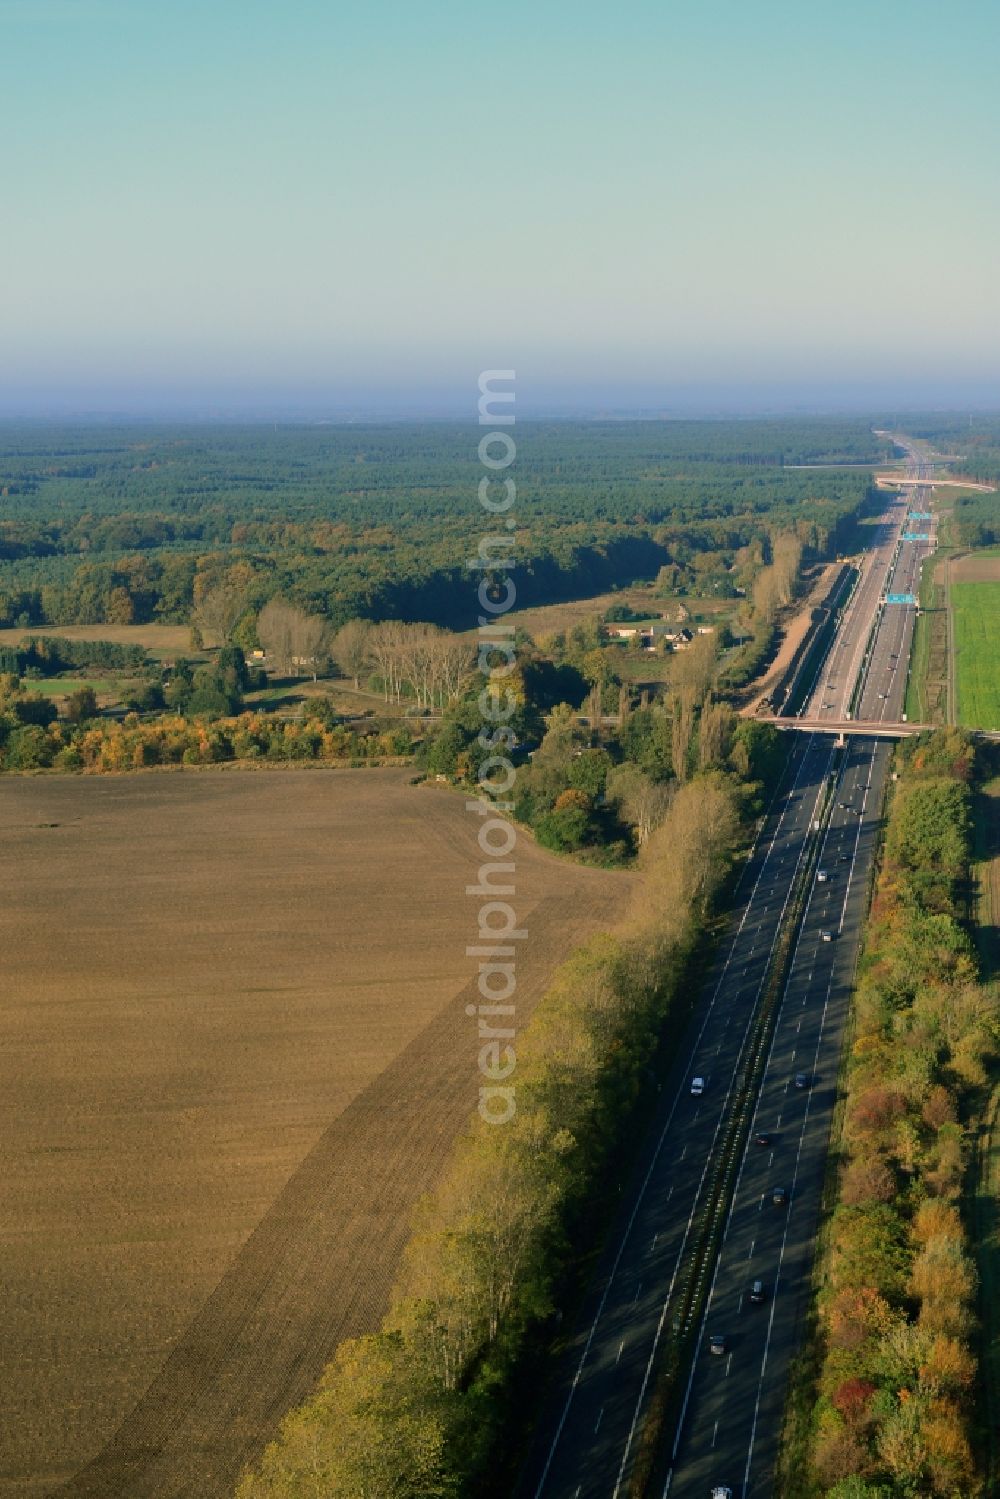 Neu Vehlefanz from the bird's eye view: Construction site of the junction Havelland at the motorway A10 and A24 in the state Brandenburg